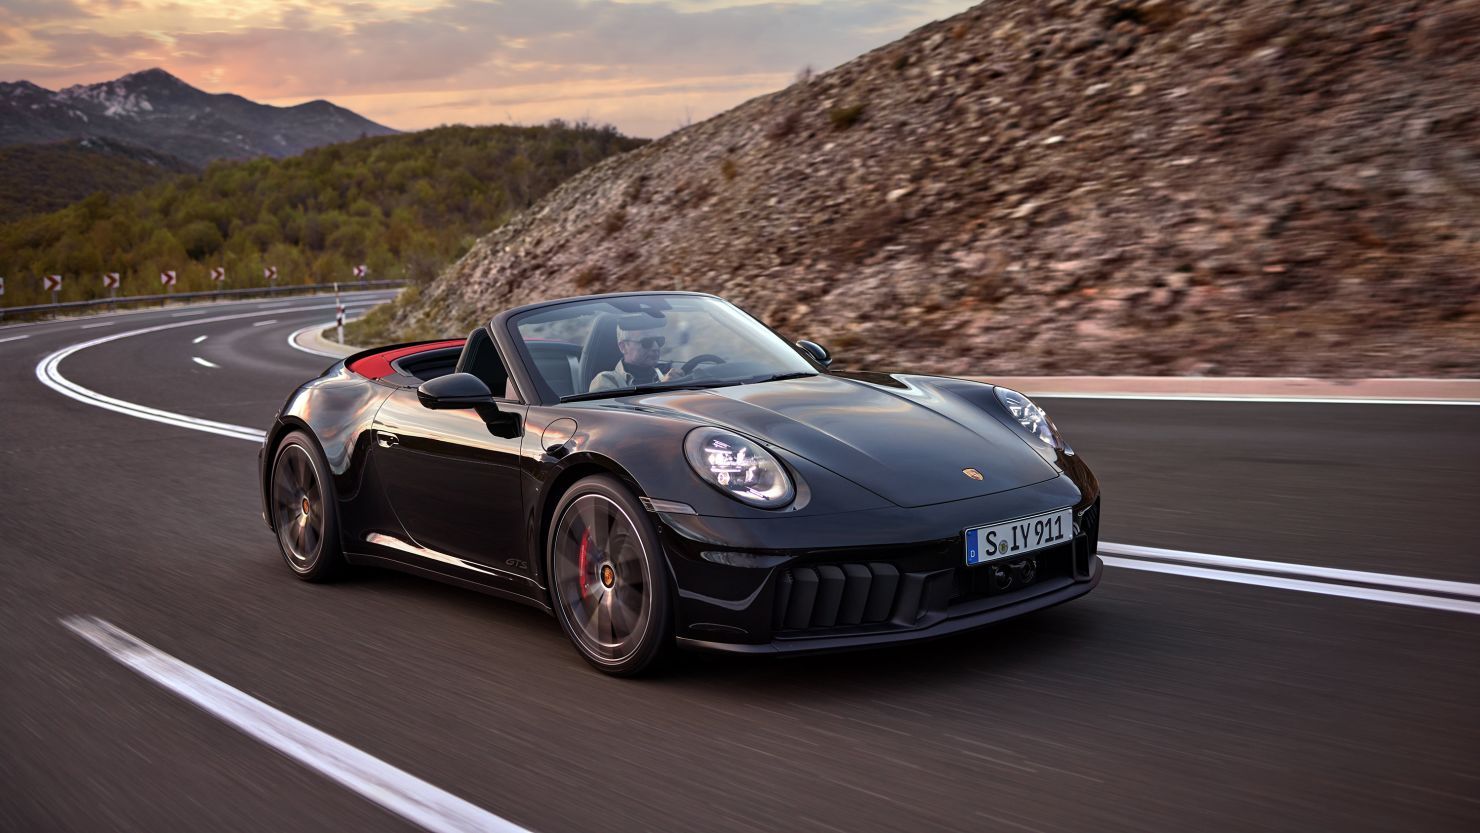 Porsche reveals a new hybrid 911 as more consumers embrace hybrids over  electric vehicles | CNN Business